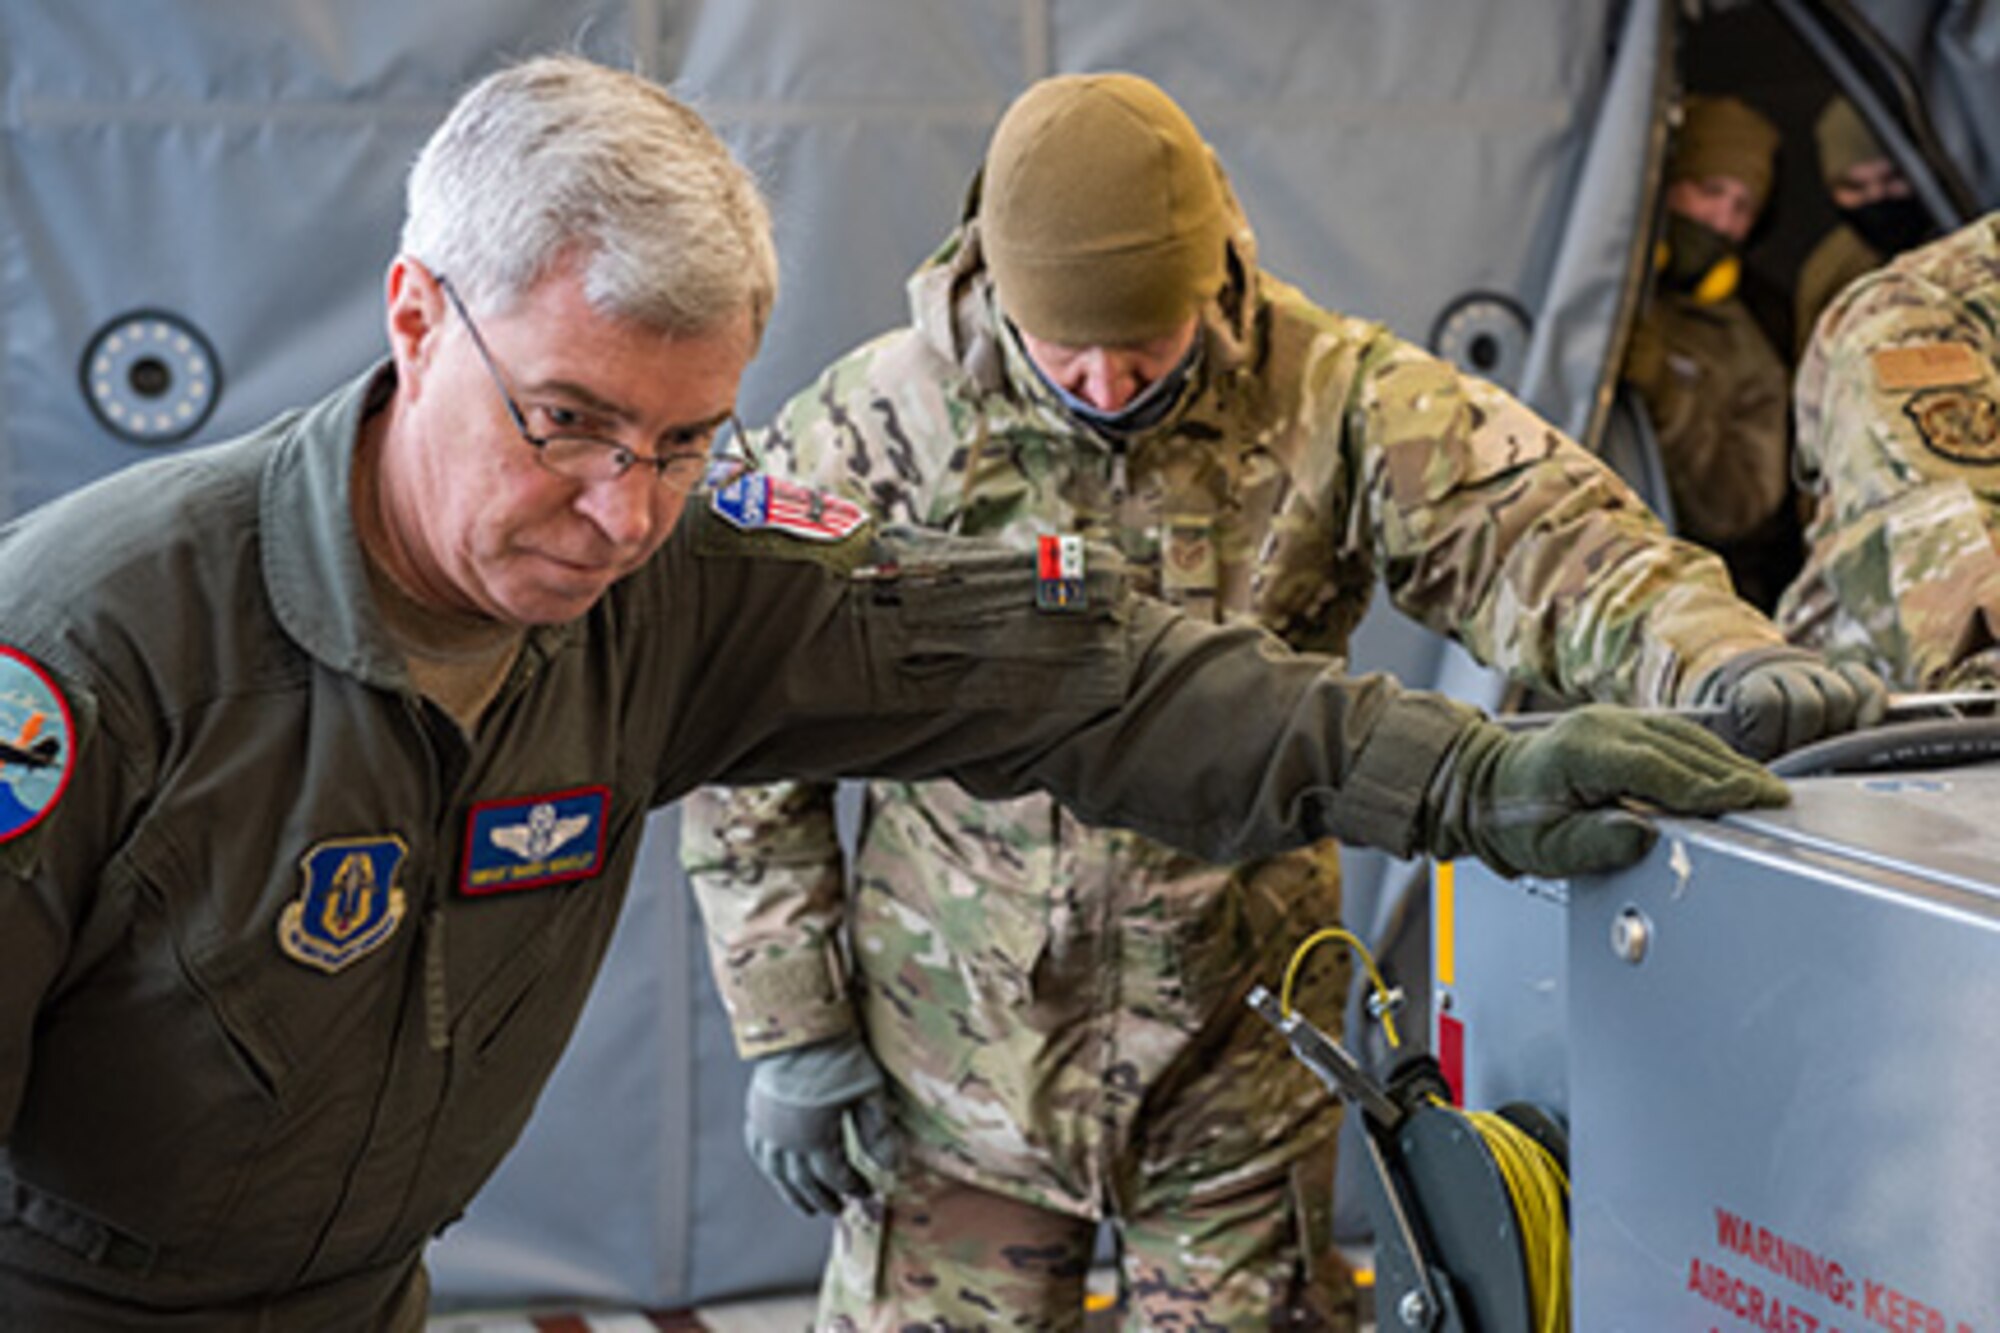 Senior Master Sgt. Barry Bradley, a boom operator from the 916th Air Refueling Wing, and Tech. Sgt. Michael Sizemore, an air transportation specialist from the 67th Aerial Port Squadron, push a training pallet into a KC-46A Pegasus, Jan. 10, 2021, at Hill Air Force Base, Utah.